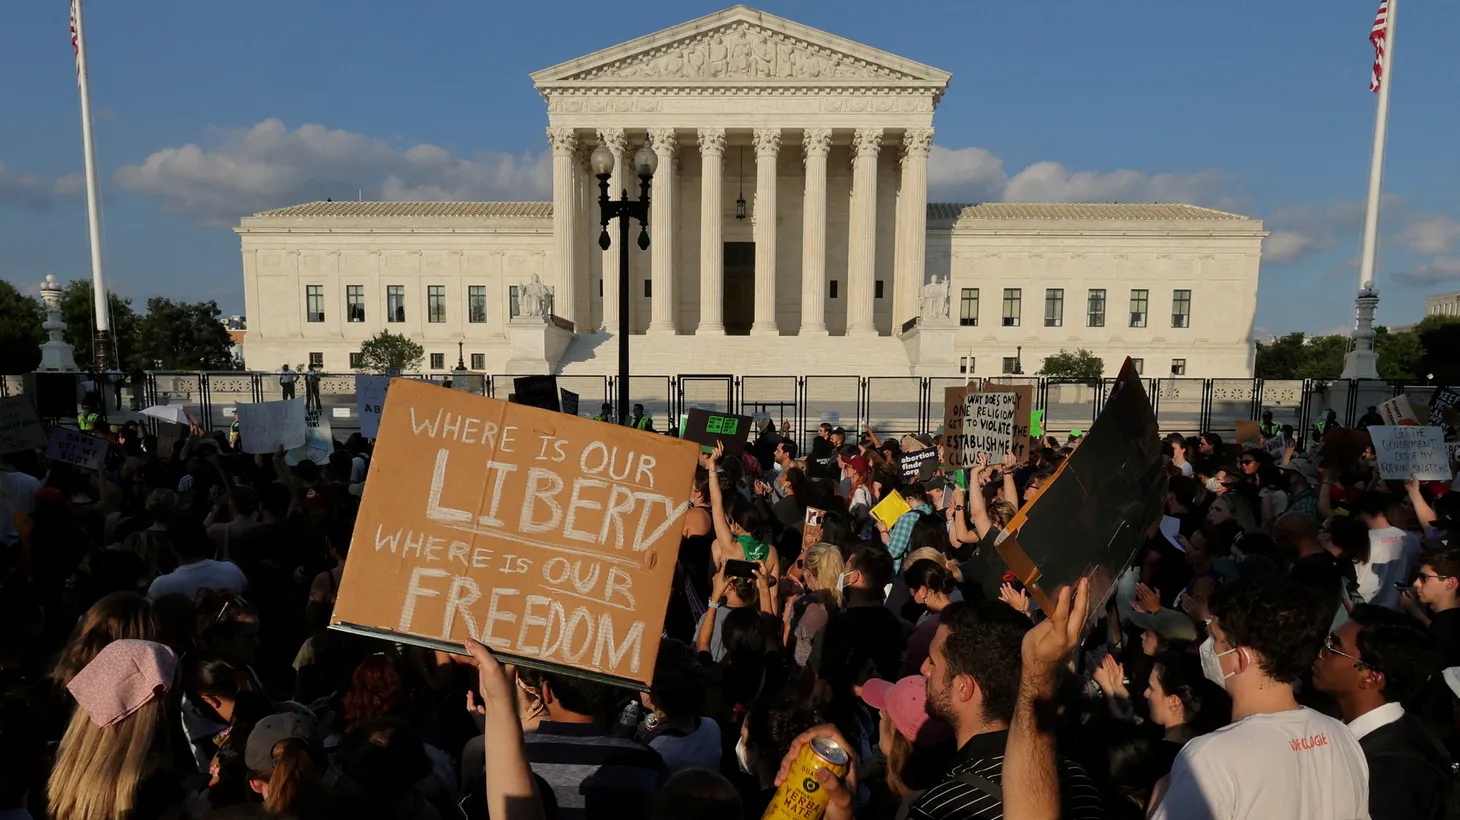 Abortion rights demonstrators protest outside the United States Supreme Court as the justices rule on Dobbs v. Women's Health Organization, overturning the landmark Roe v. Wade decision in Washington, U.S., June 24, 2022.